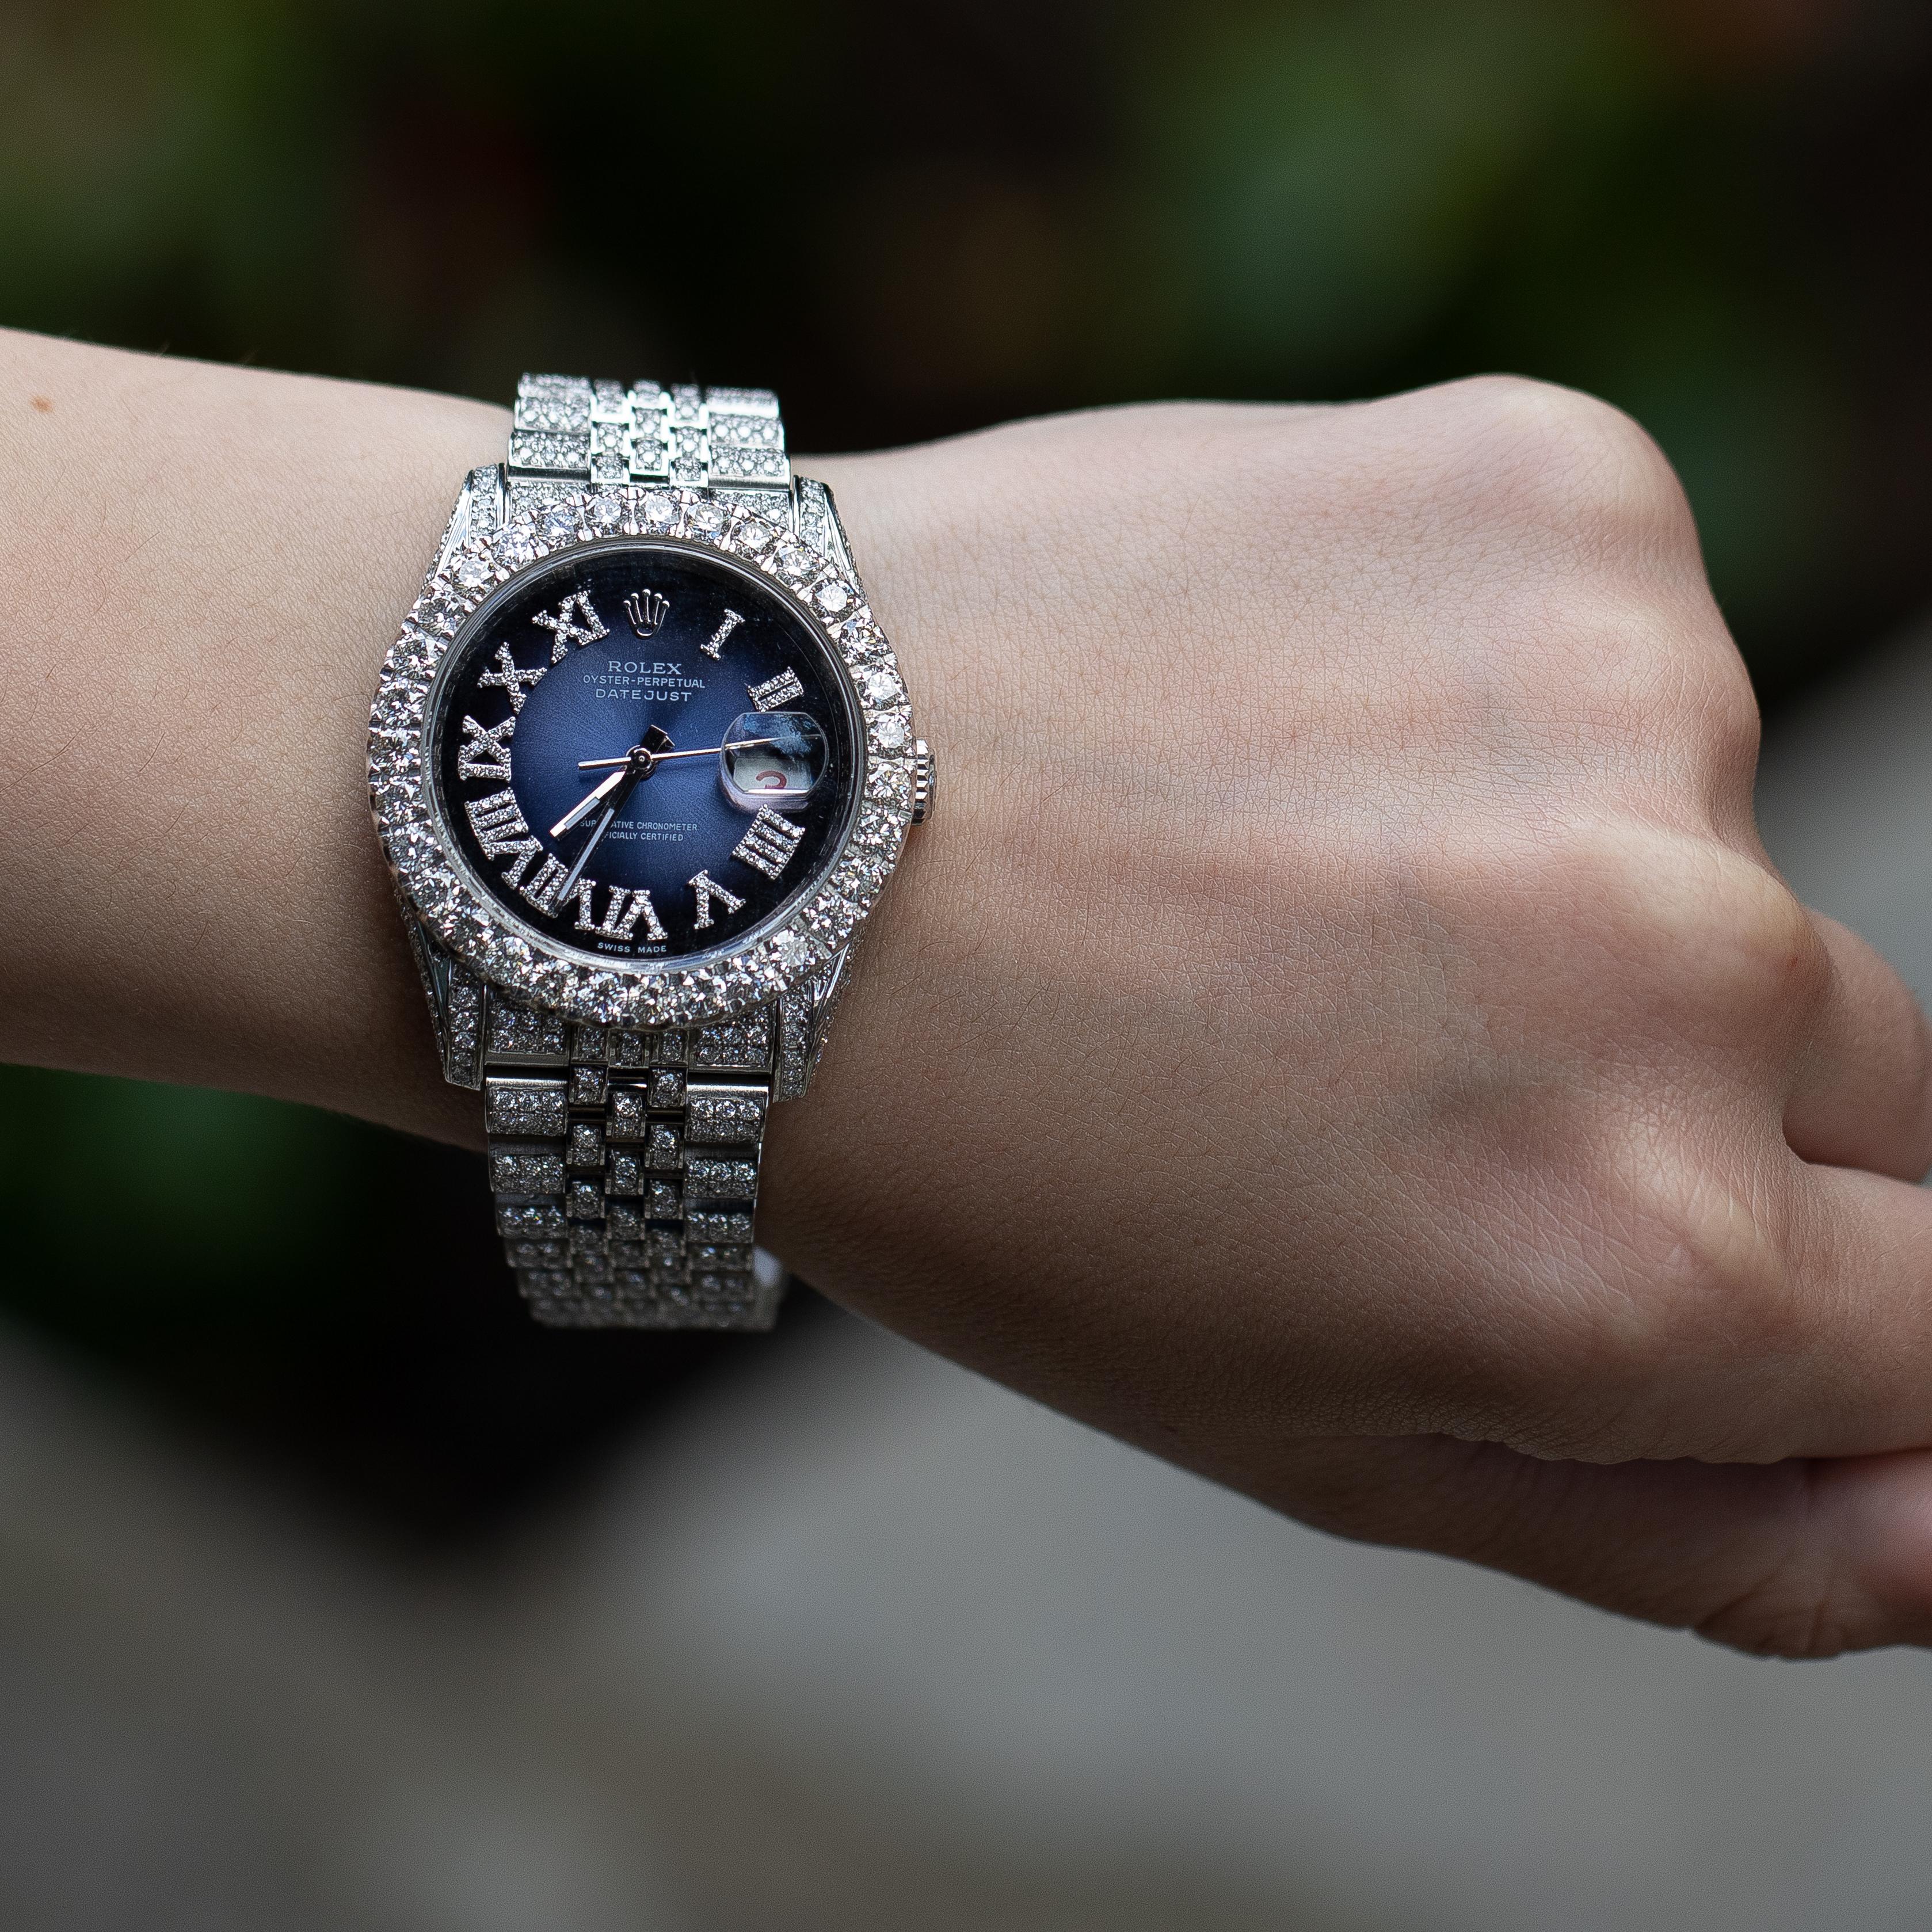 Elegant Rolex Watch Custom Designed with 21 Carats of High-Quality Diamonds. Both Timeless and Beautiful makes this a Timepiece that will both keep you timely and radiant. 
Rolex Watch
Custom Made 
21 Carats Diamonds
( Color: F, Clarity: VS )